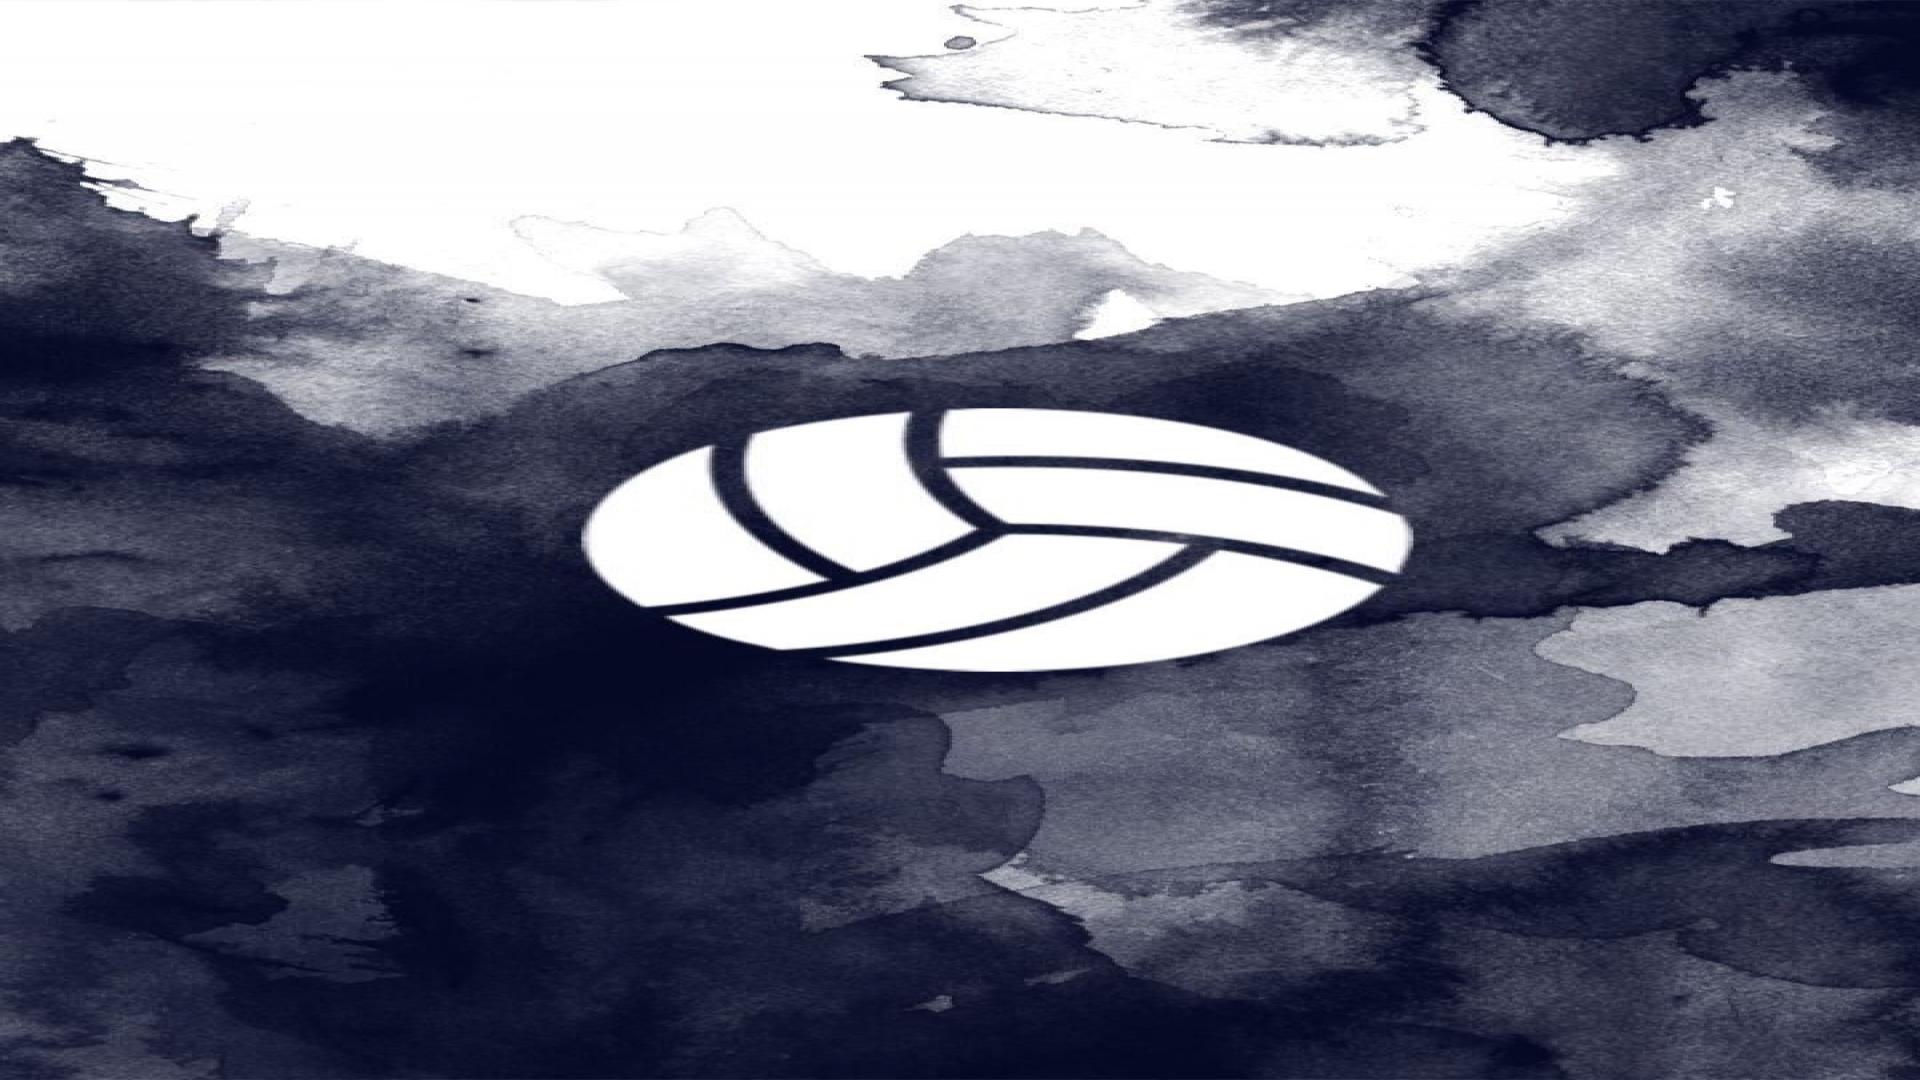 Cool Volleyball Hd 4k Background Wallpapers 3D